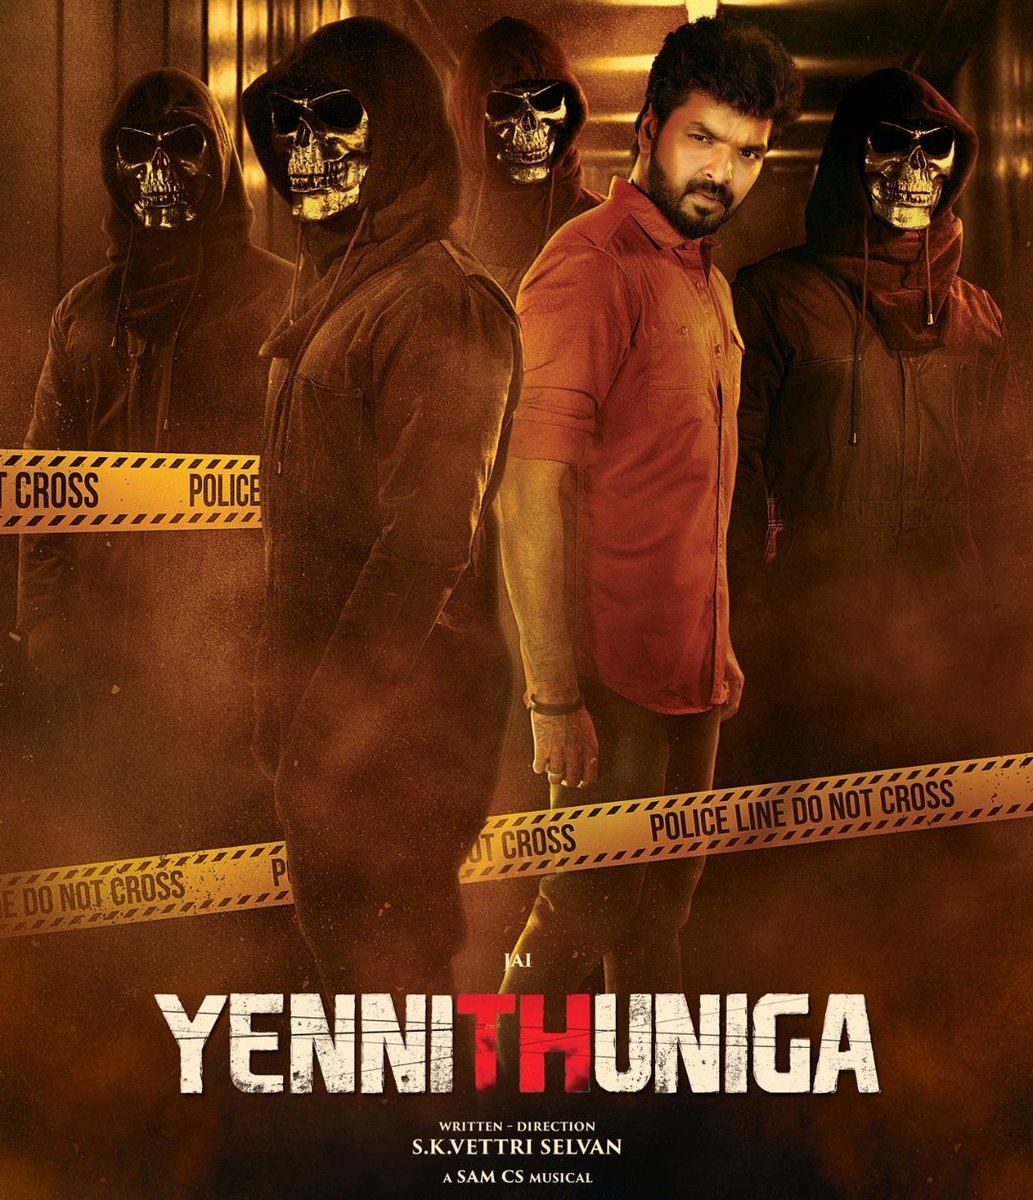 .#YenniThuniga - A story that doesnt impress anywhere. Actor Jai definitely needs to choose good stories and deliver neat spell. Interval twist alone is good. Sam CS music is appreciable. Too lengthy, feeble writing makes it overall, a mediocre fare.